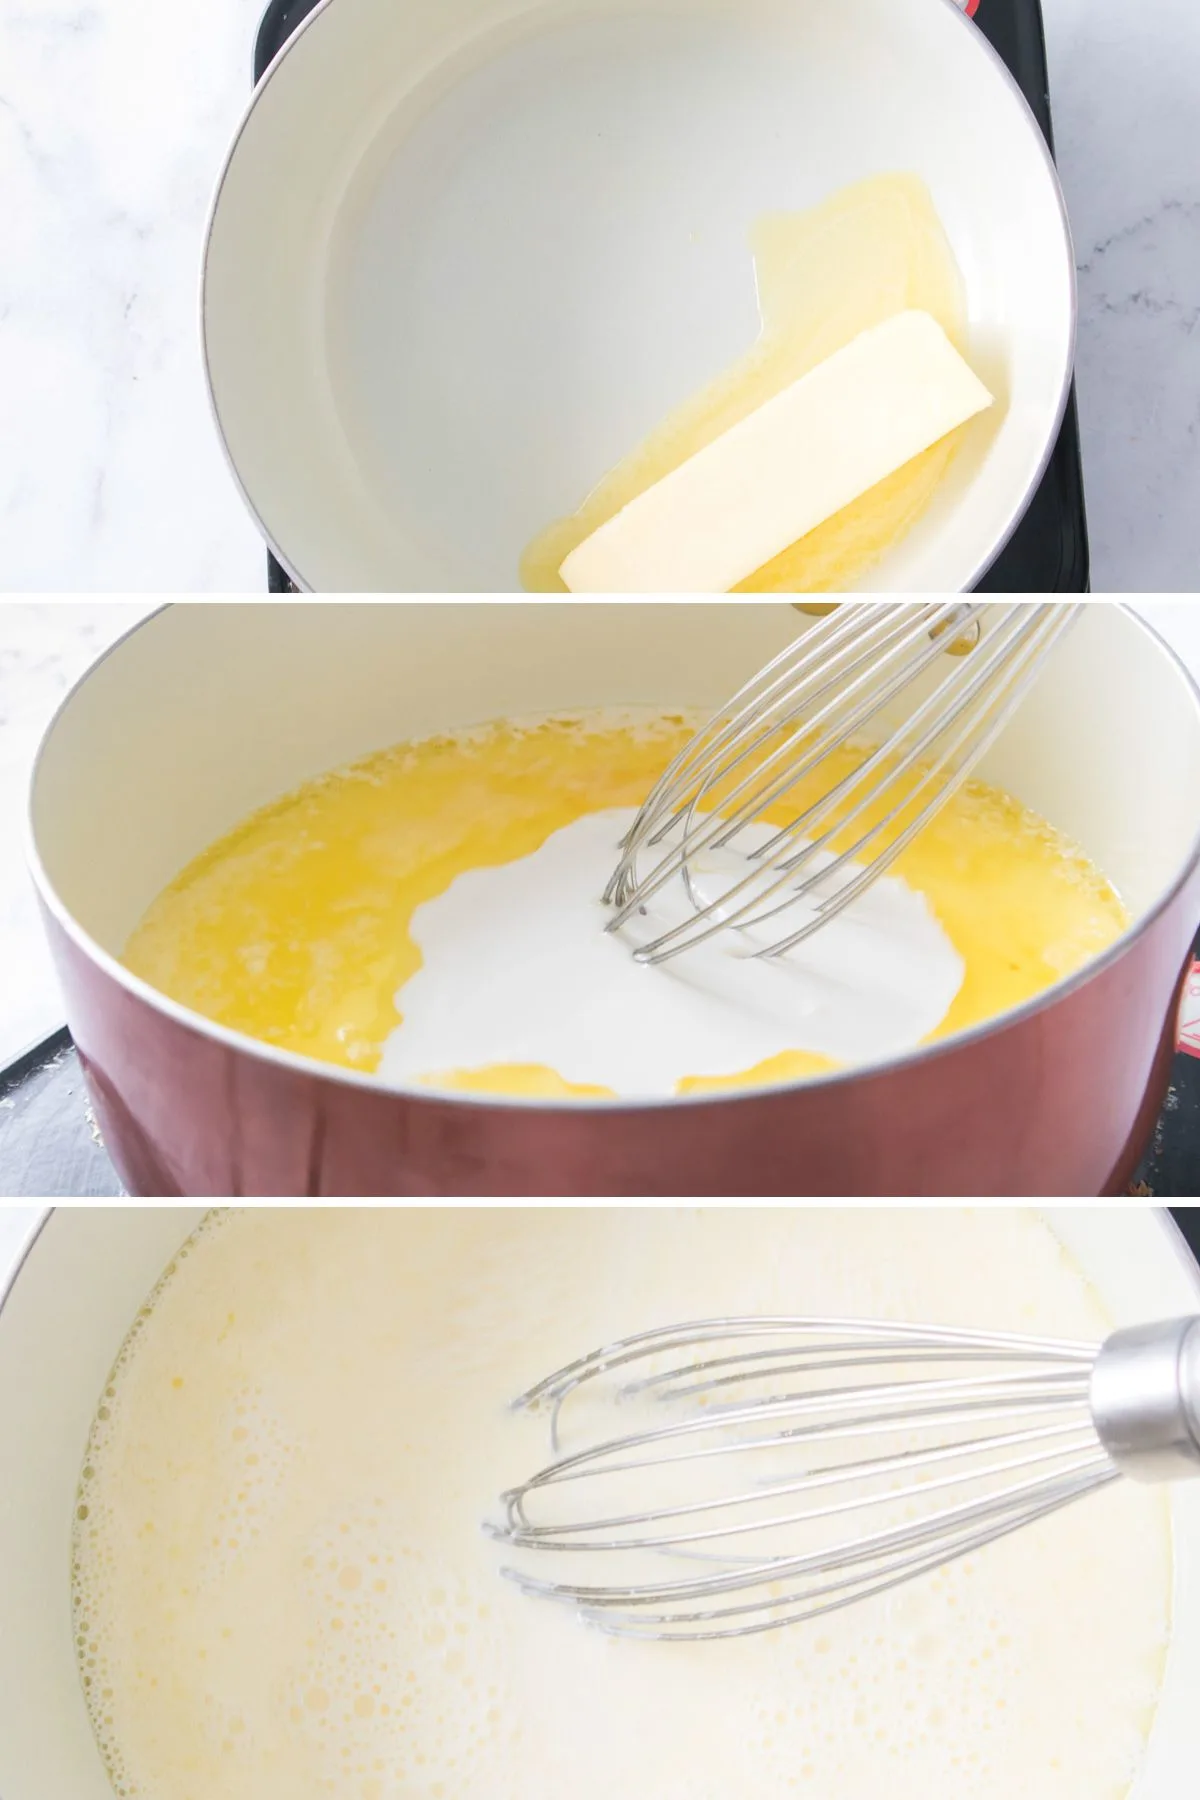 Pictures of melting butter and adding cream to make Alfredo sauce.